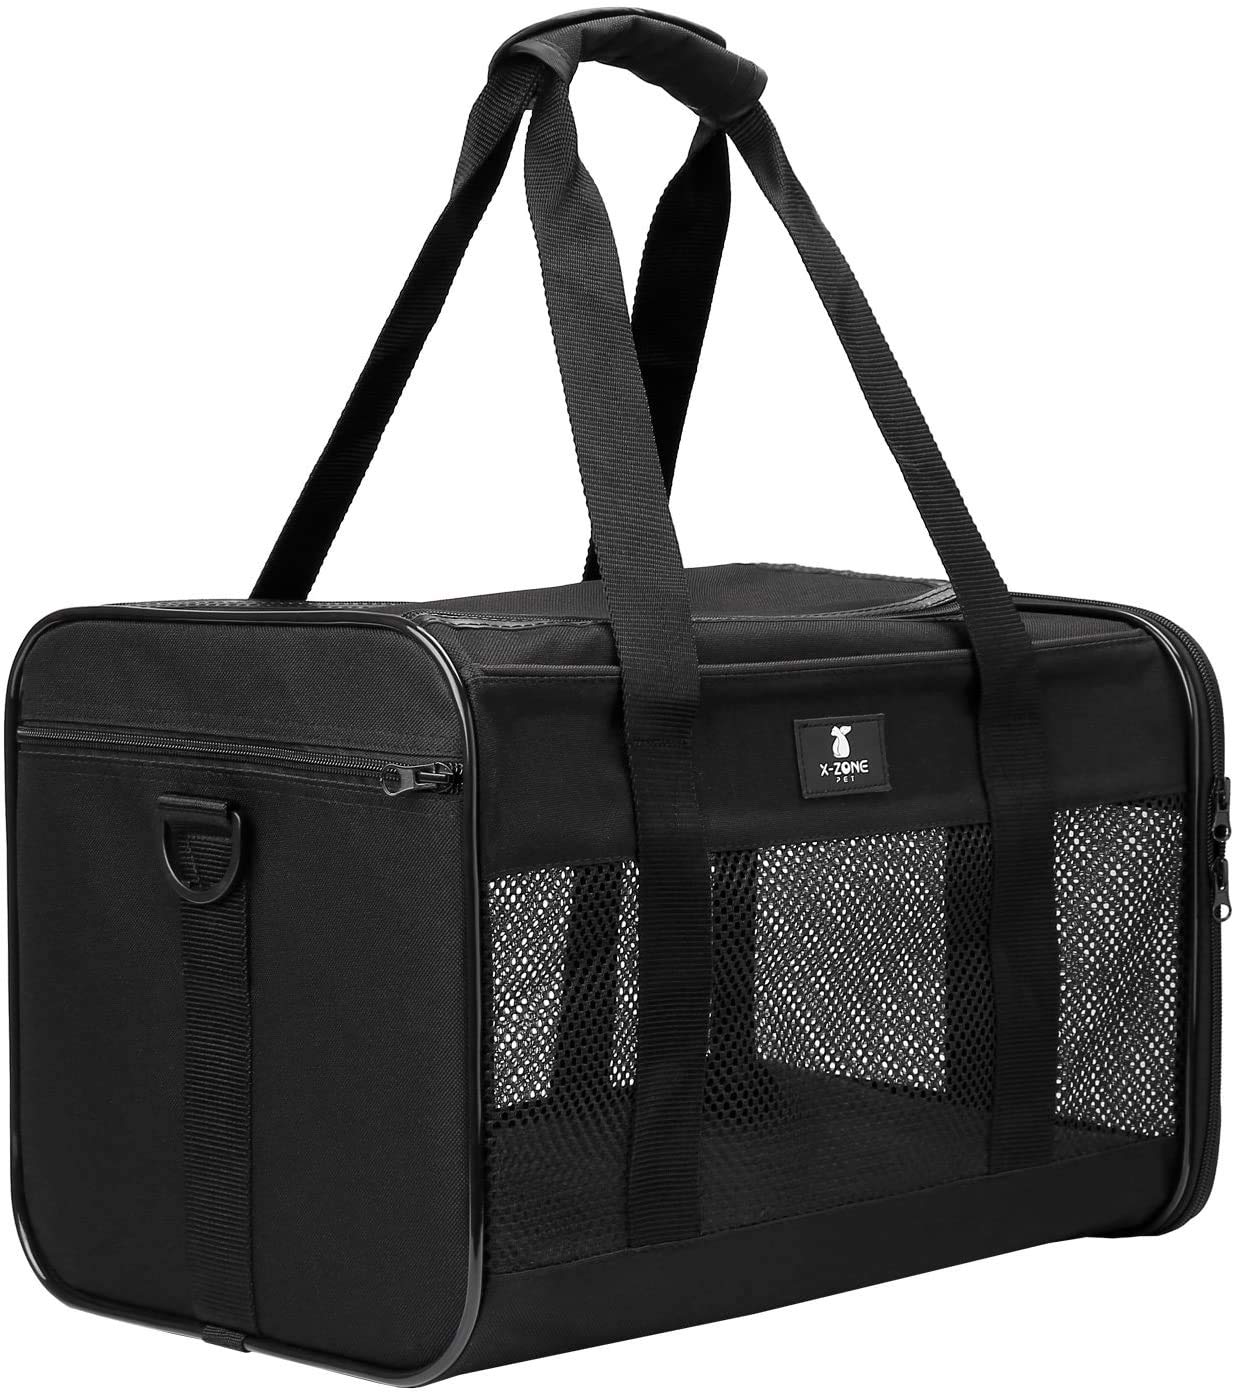 X-ZONE PET Airline Approved Soft-Sided Pet Travel